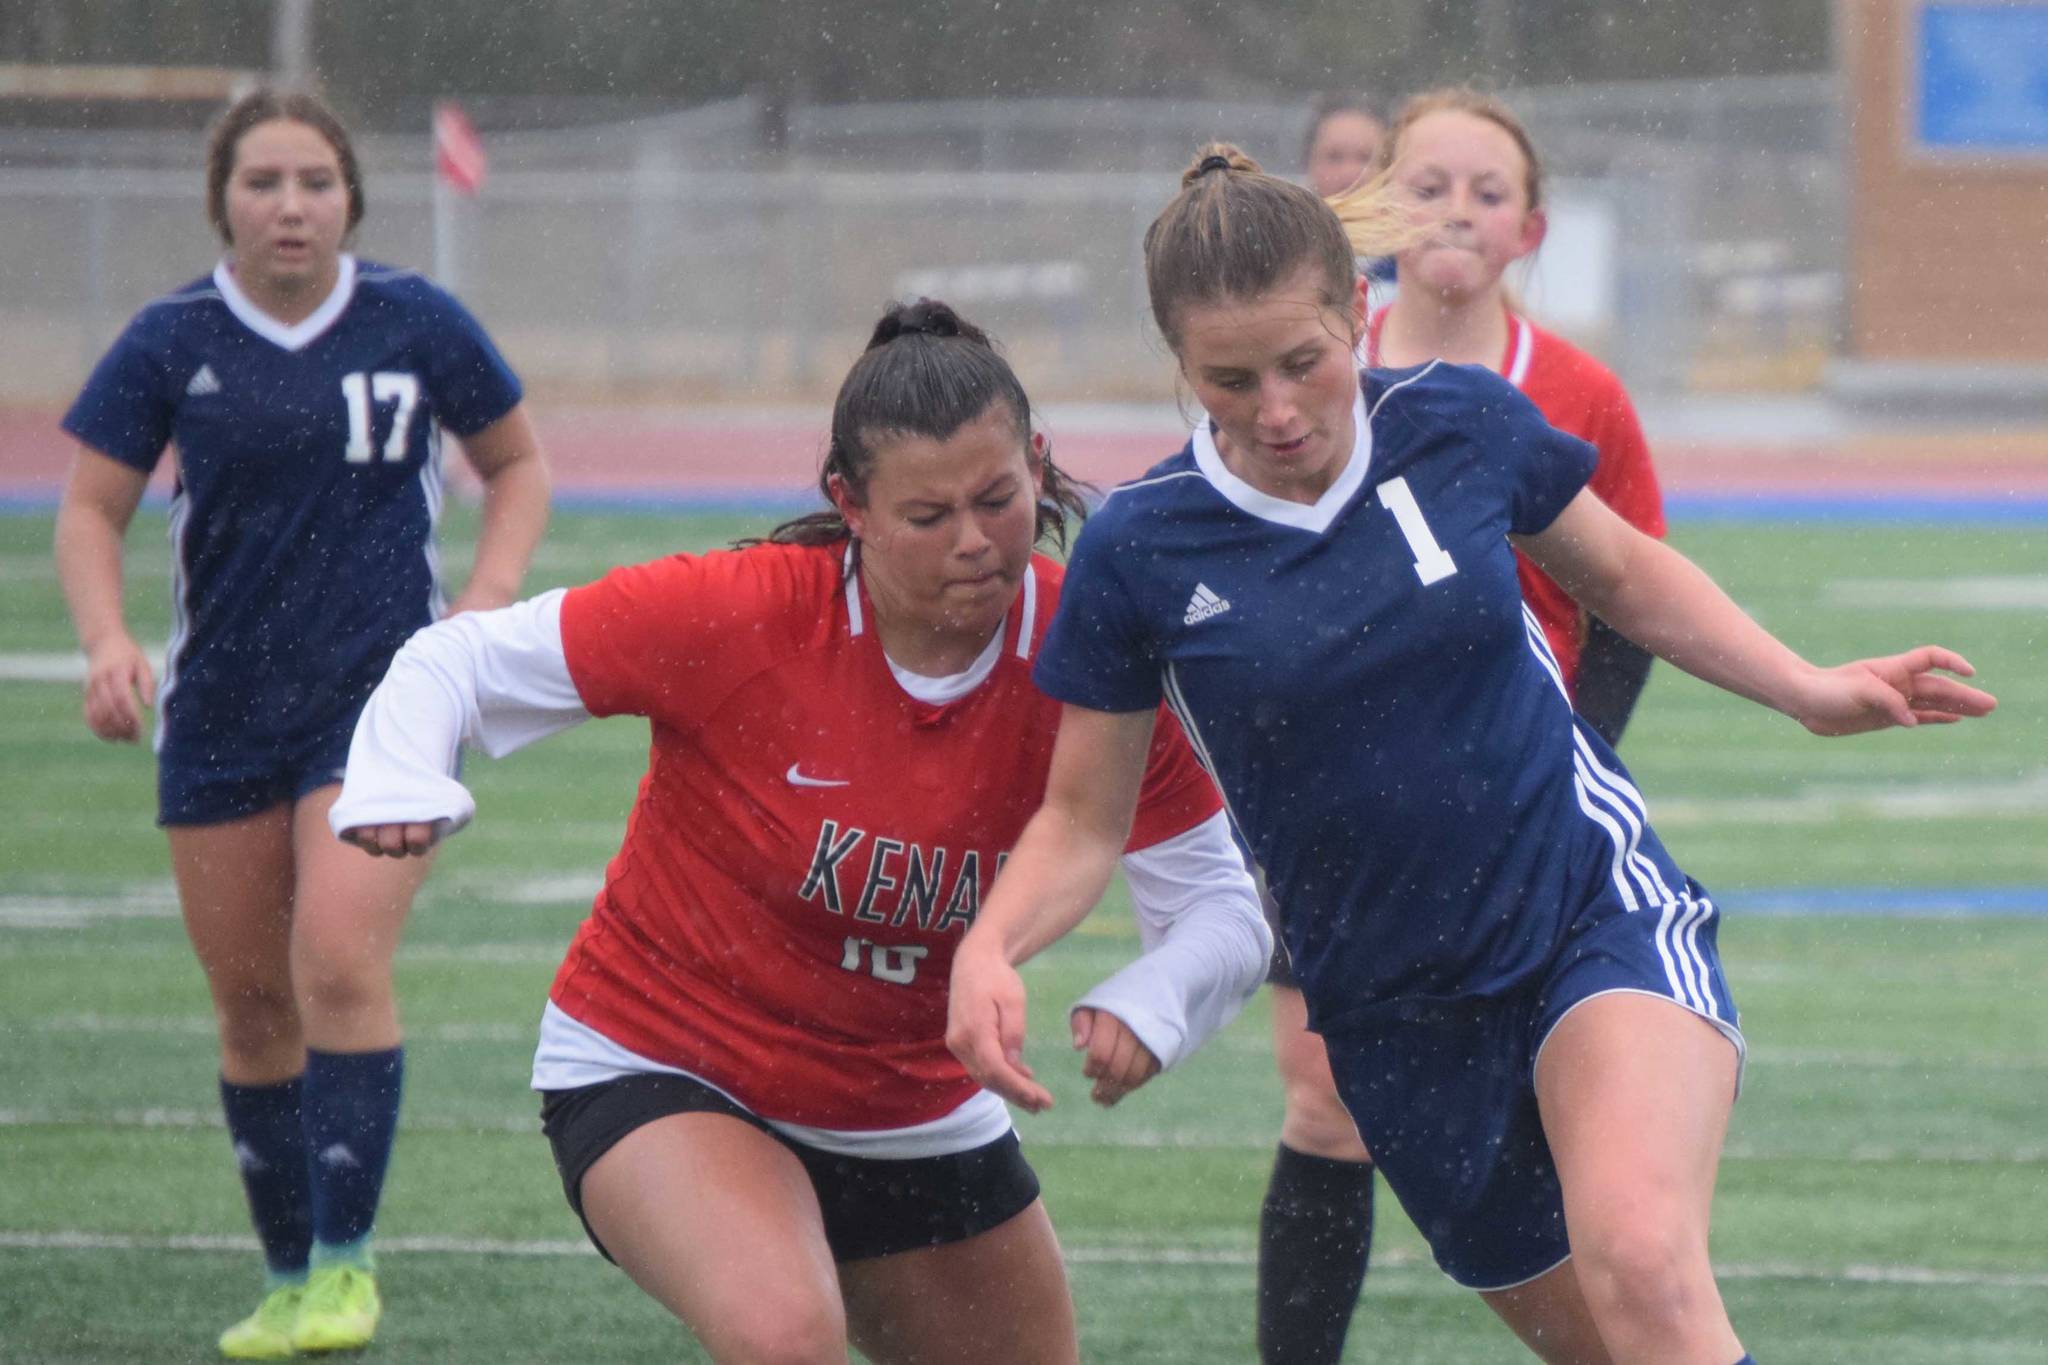 Soldotna's Rhys Cannava dribbles in for a goal against Kenai Central's Valerie Villegas on Tuesday, May 11, 2021, at Soldotna High School in Soldotna, Alaska. (Photo by Jeff Helminiak/Peninsula Clarion)